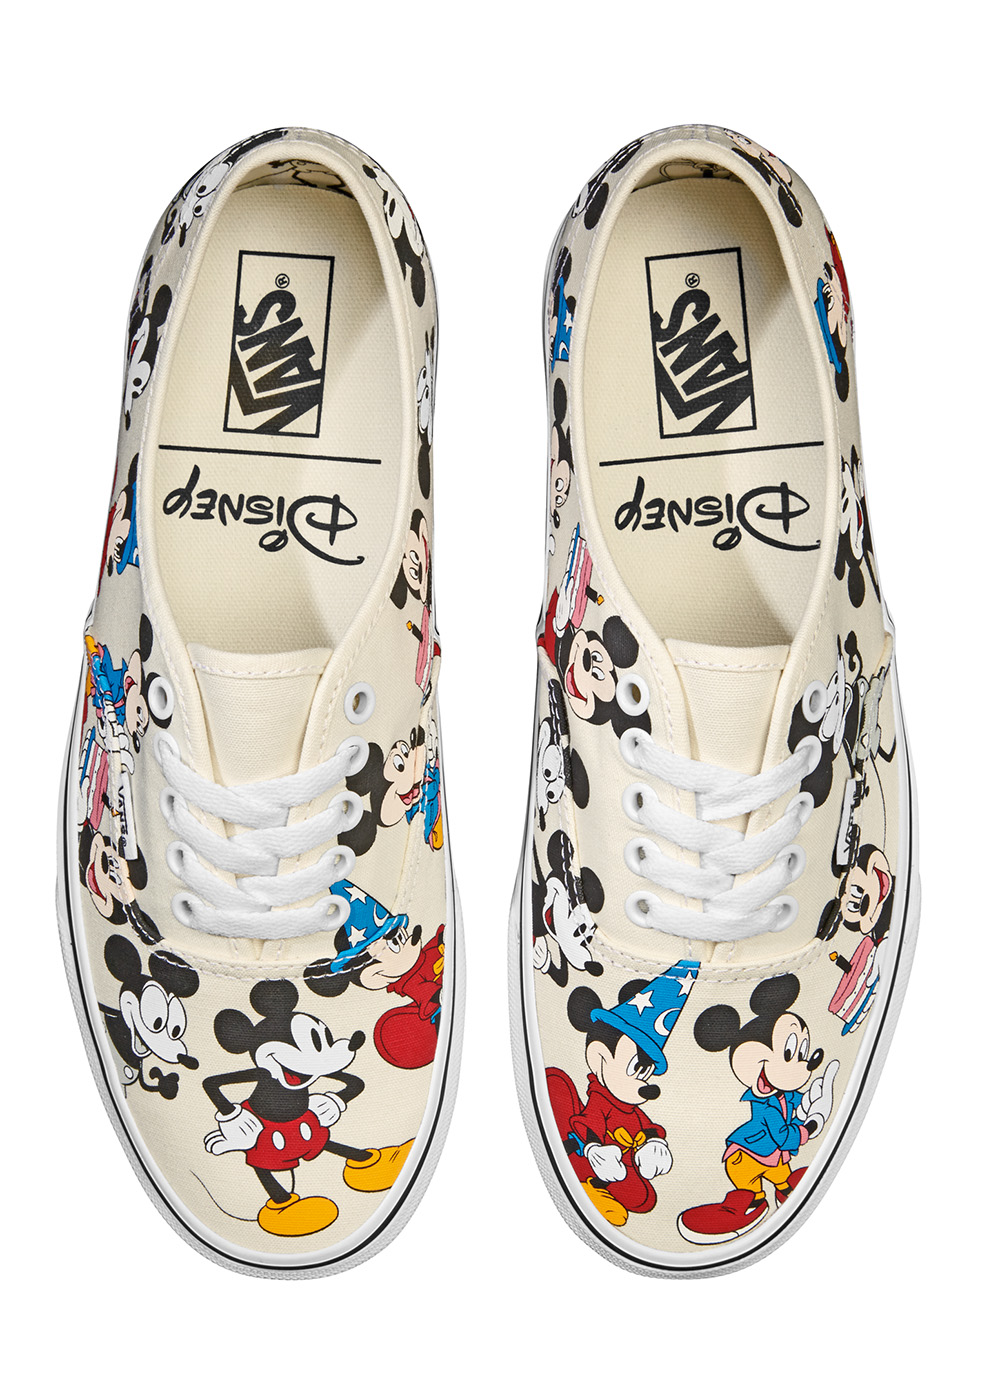 vans new mickey collection